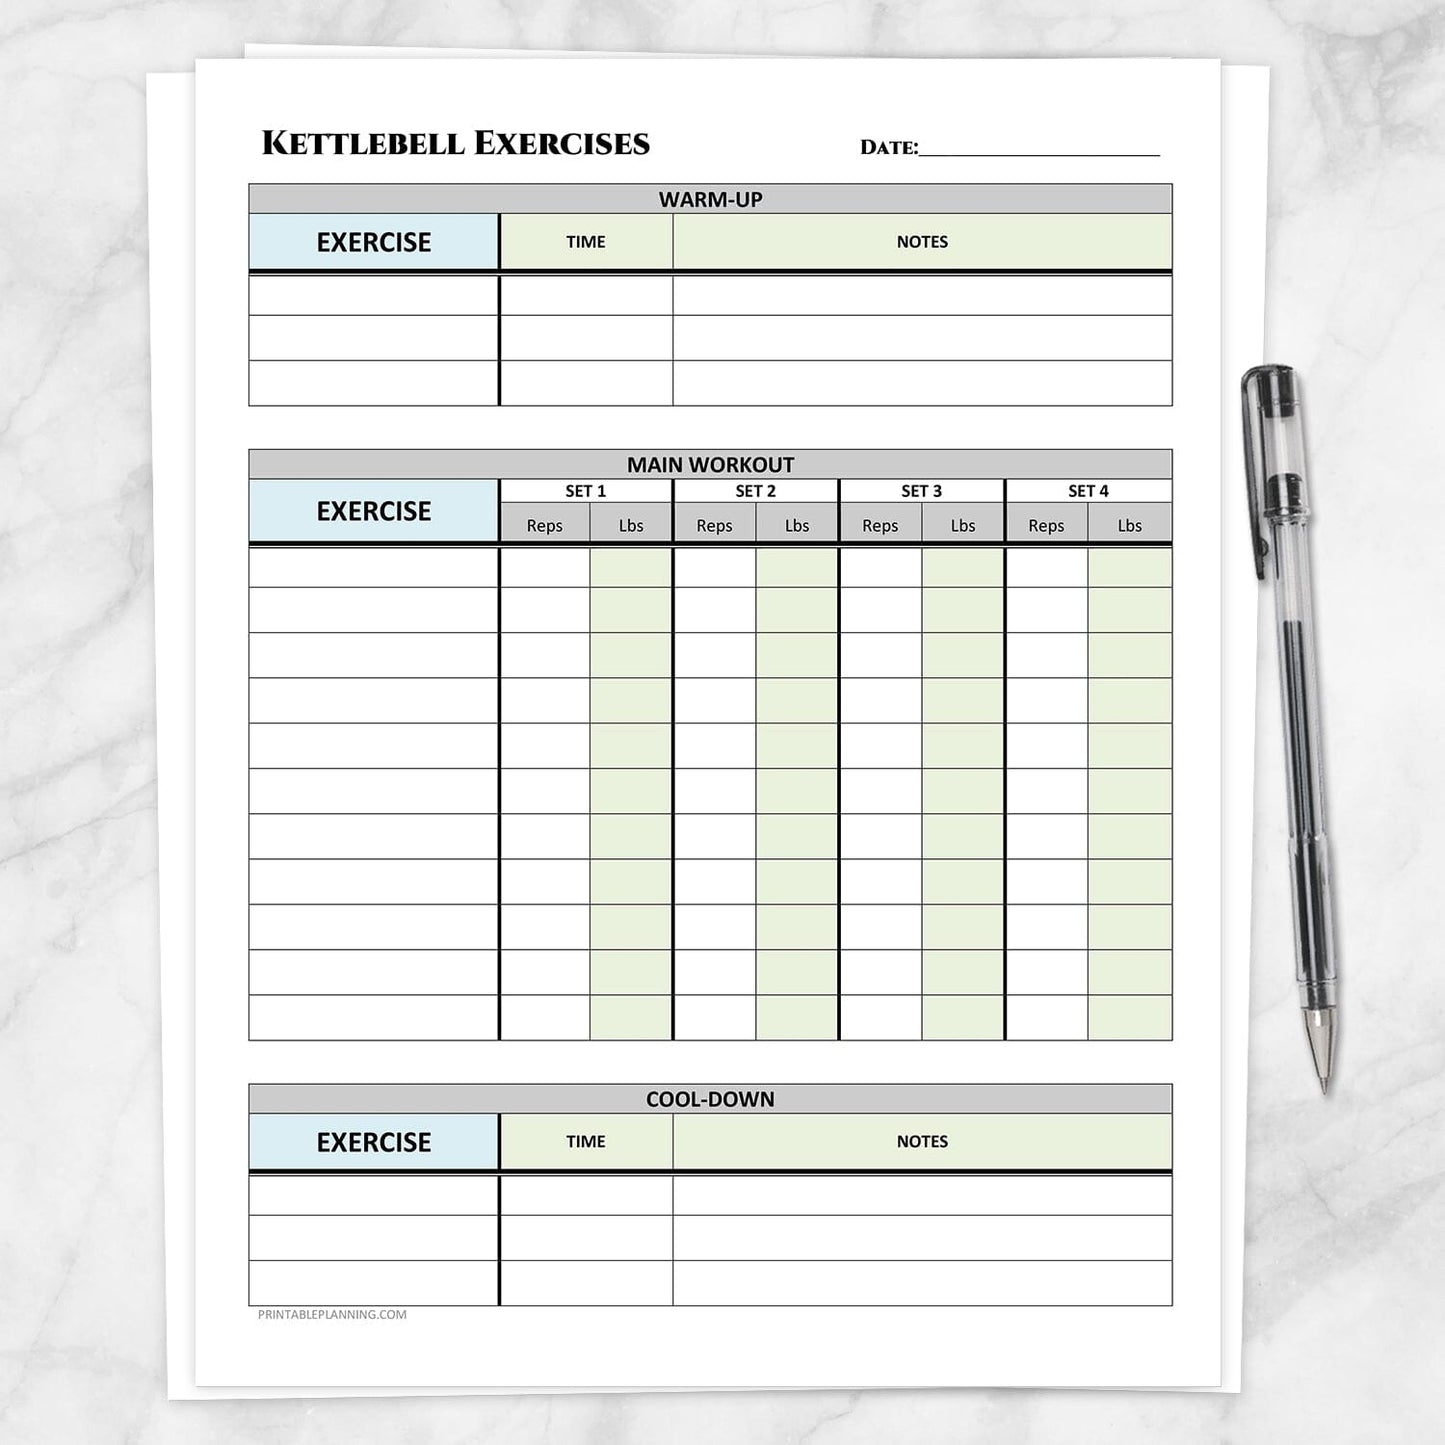 Printable Kettlebell Exercises Sheet with Warm-up and Cool-down at Printable Planning.